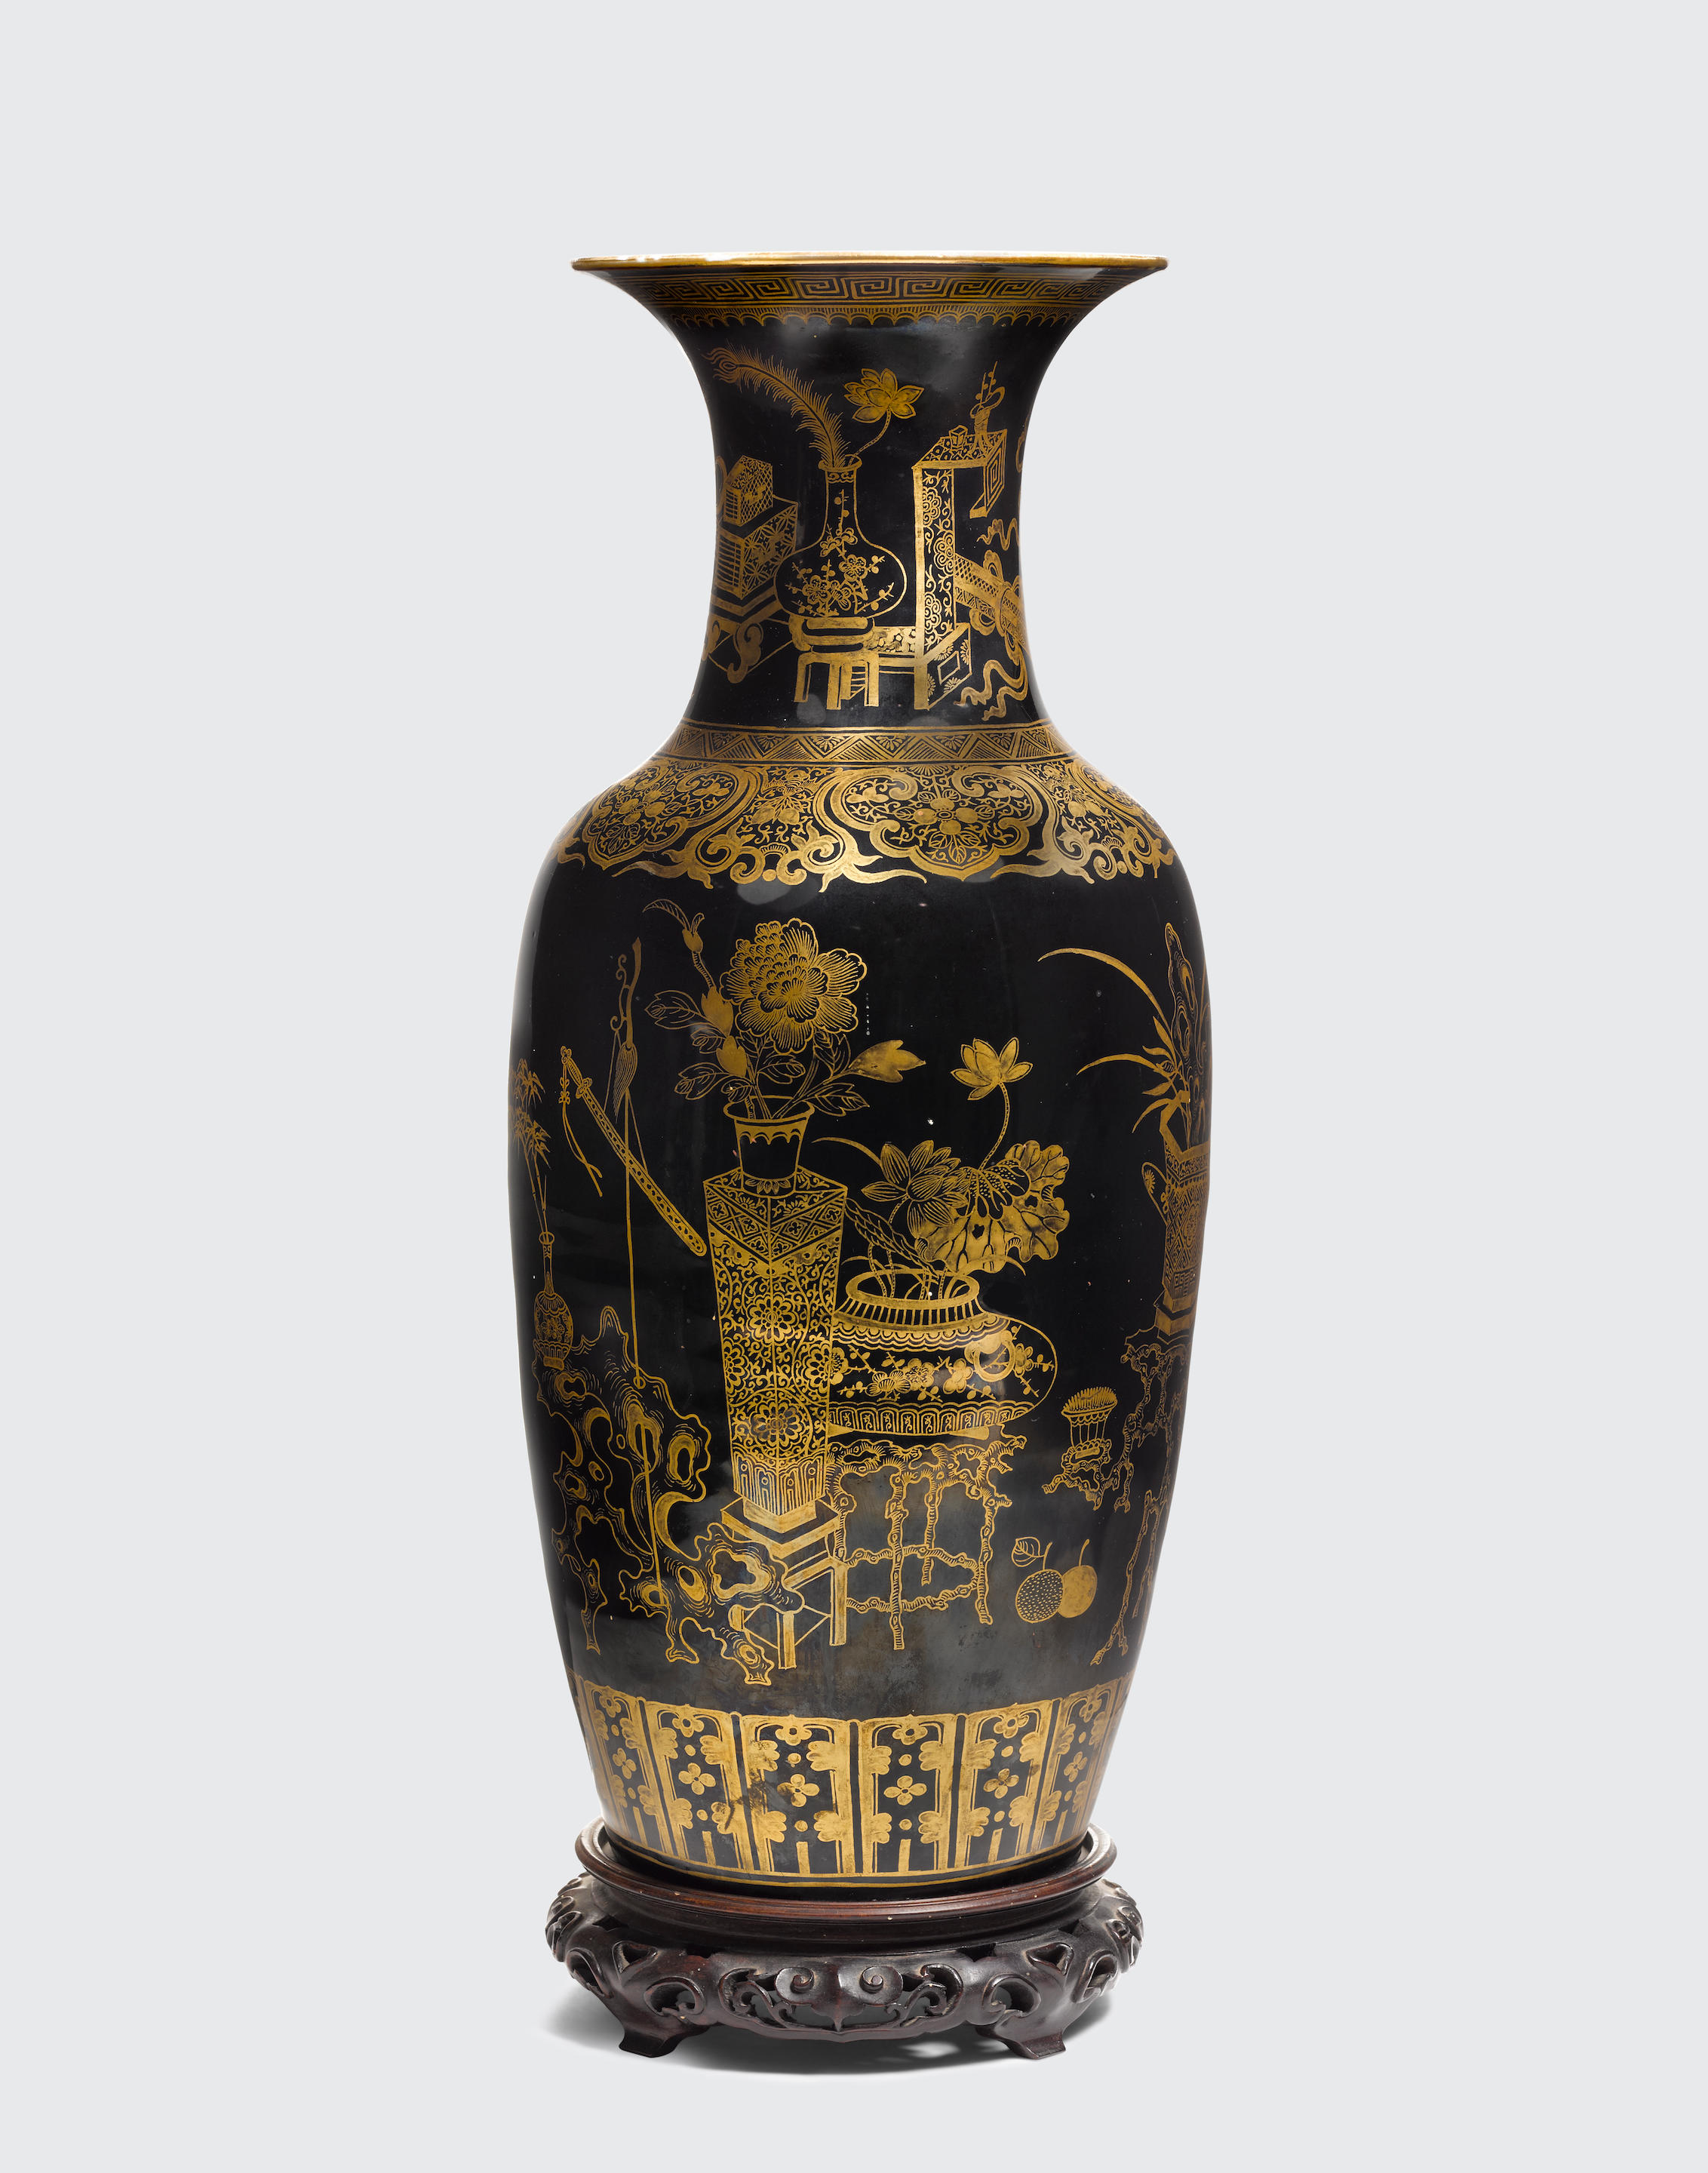 A mirror black and gilt-decorated baluster vase